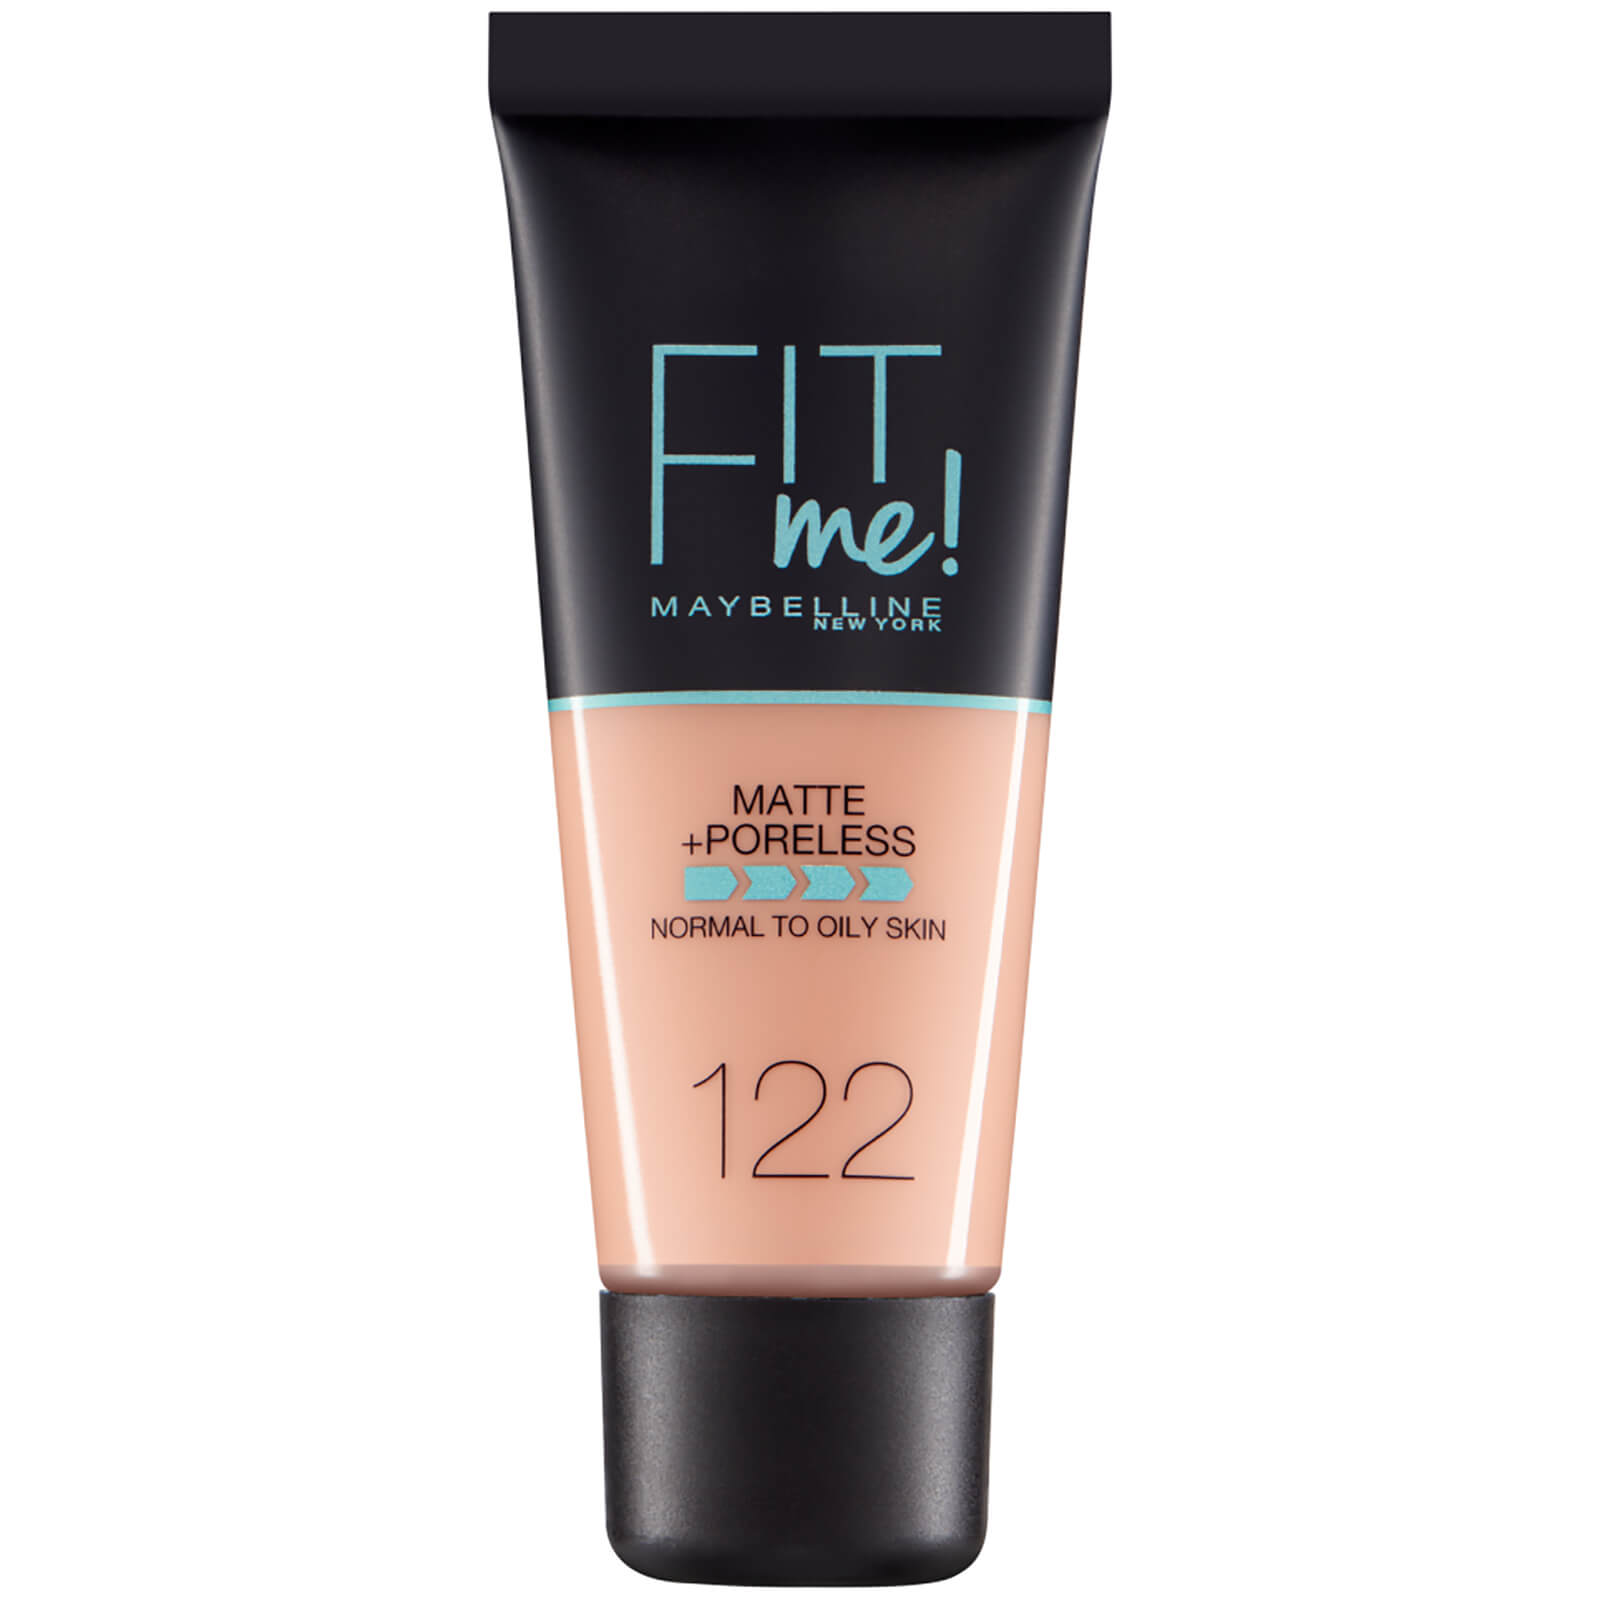 Maybelline Fit Me! Matte and Poreless Foundation 30ml (Various Shades) - 122 Creamy Beige image0